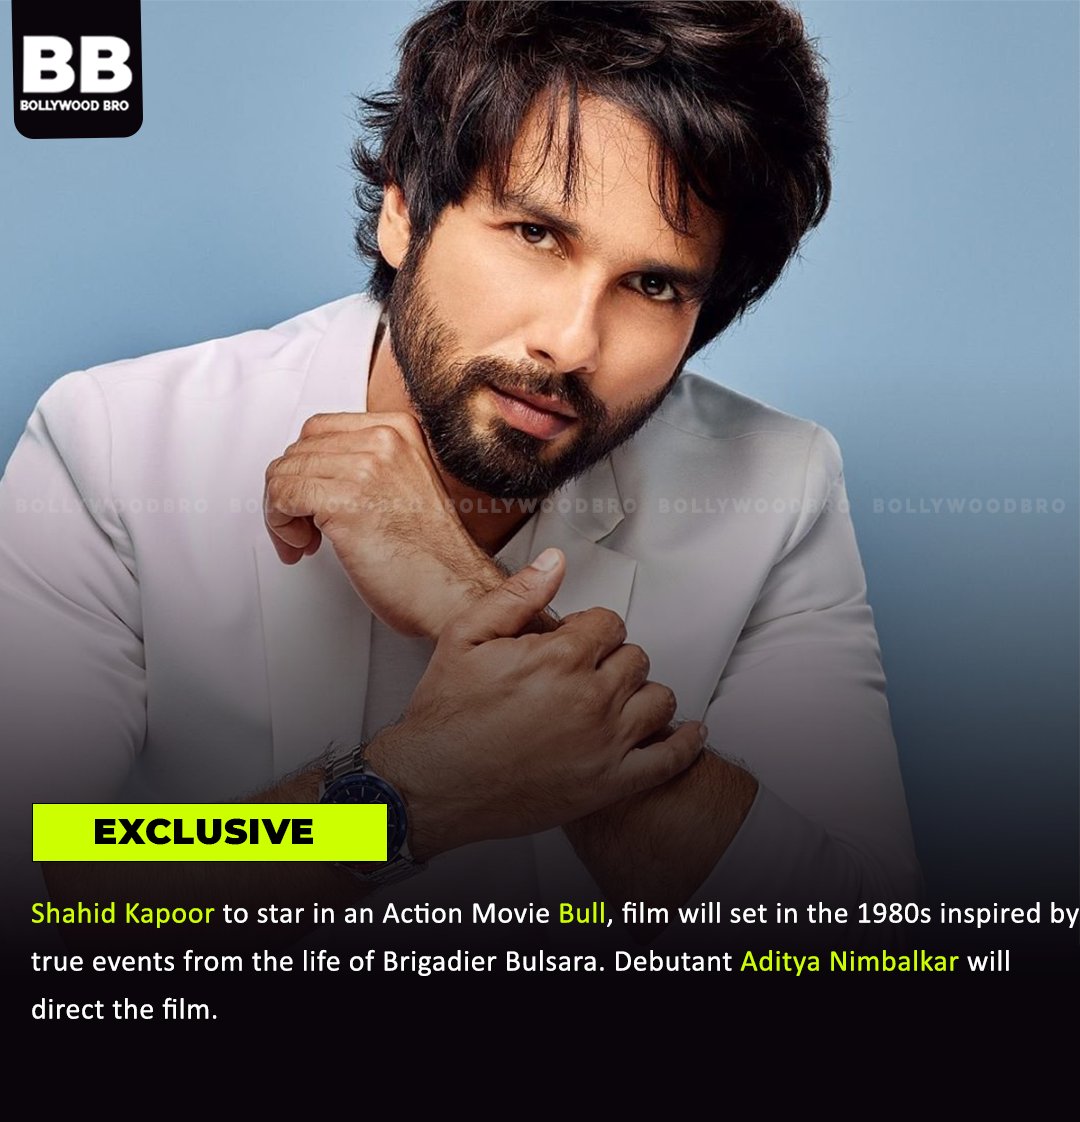 #ShahidKapoor to star in an Action Movie #Bull, film will set in the 1980s inspired by true events from the life of #BrigadierBulsara. Debutant #AdityaNimbalkar will 
direct the film.